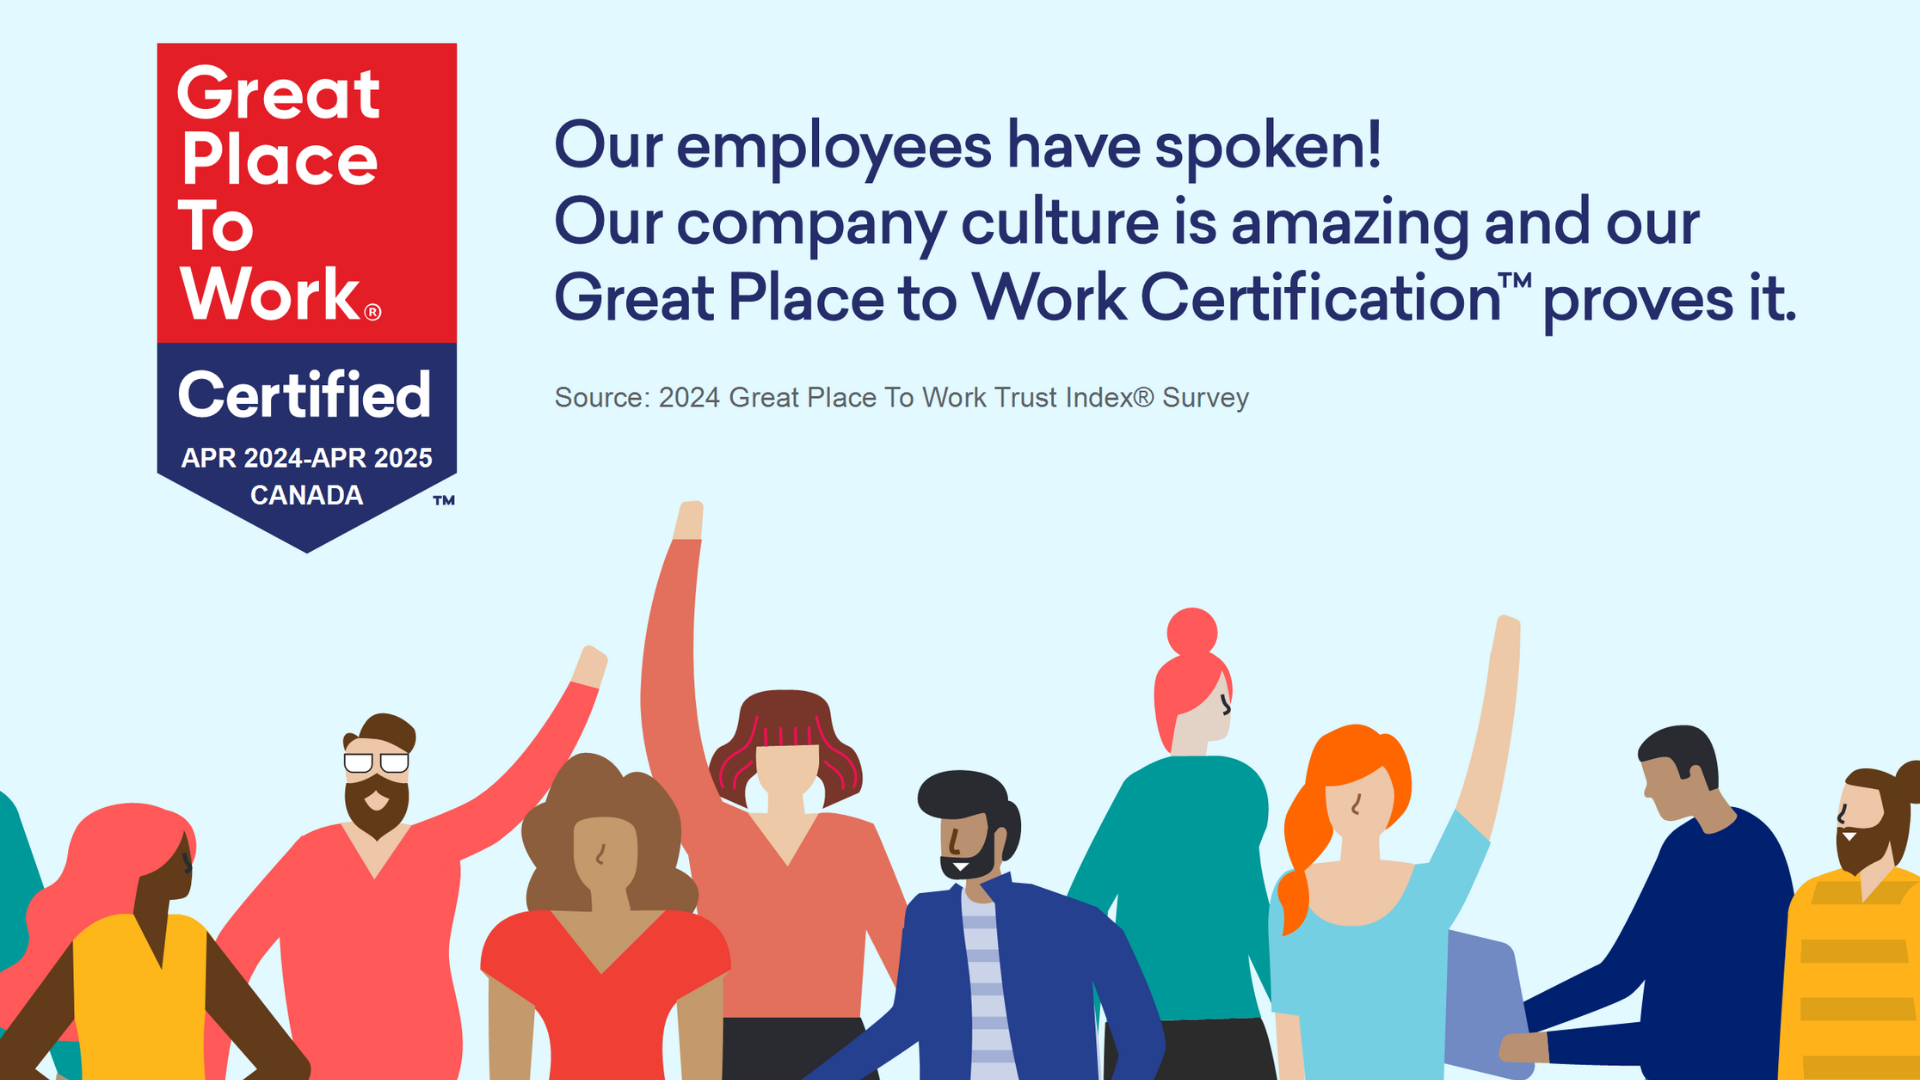 Continuing Our Journey as a Great Place to Work